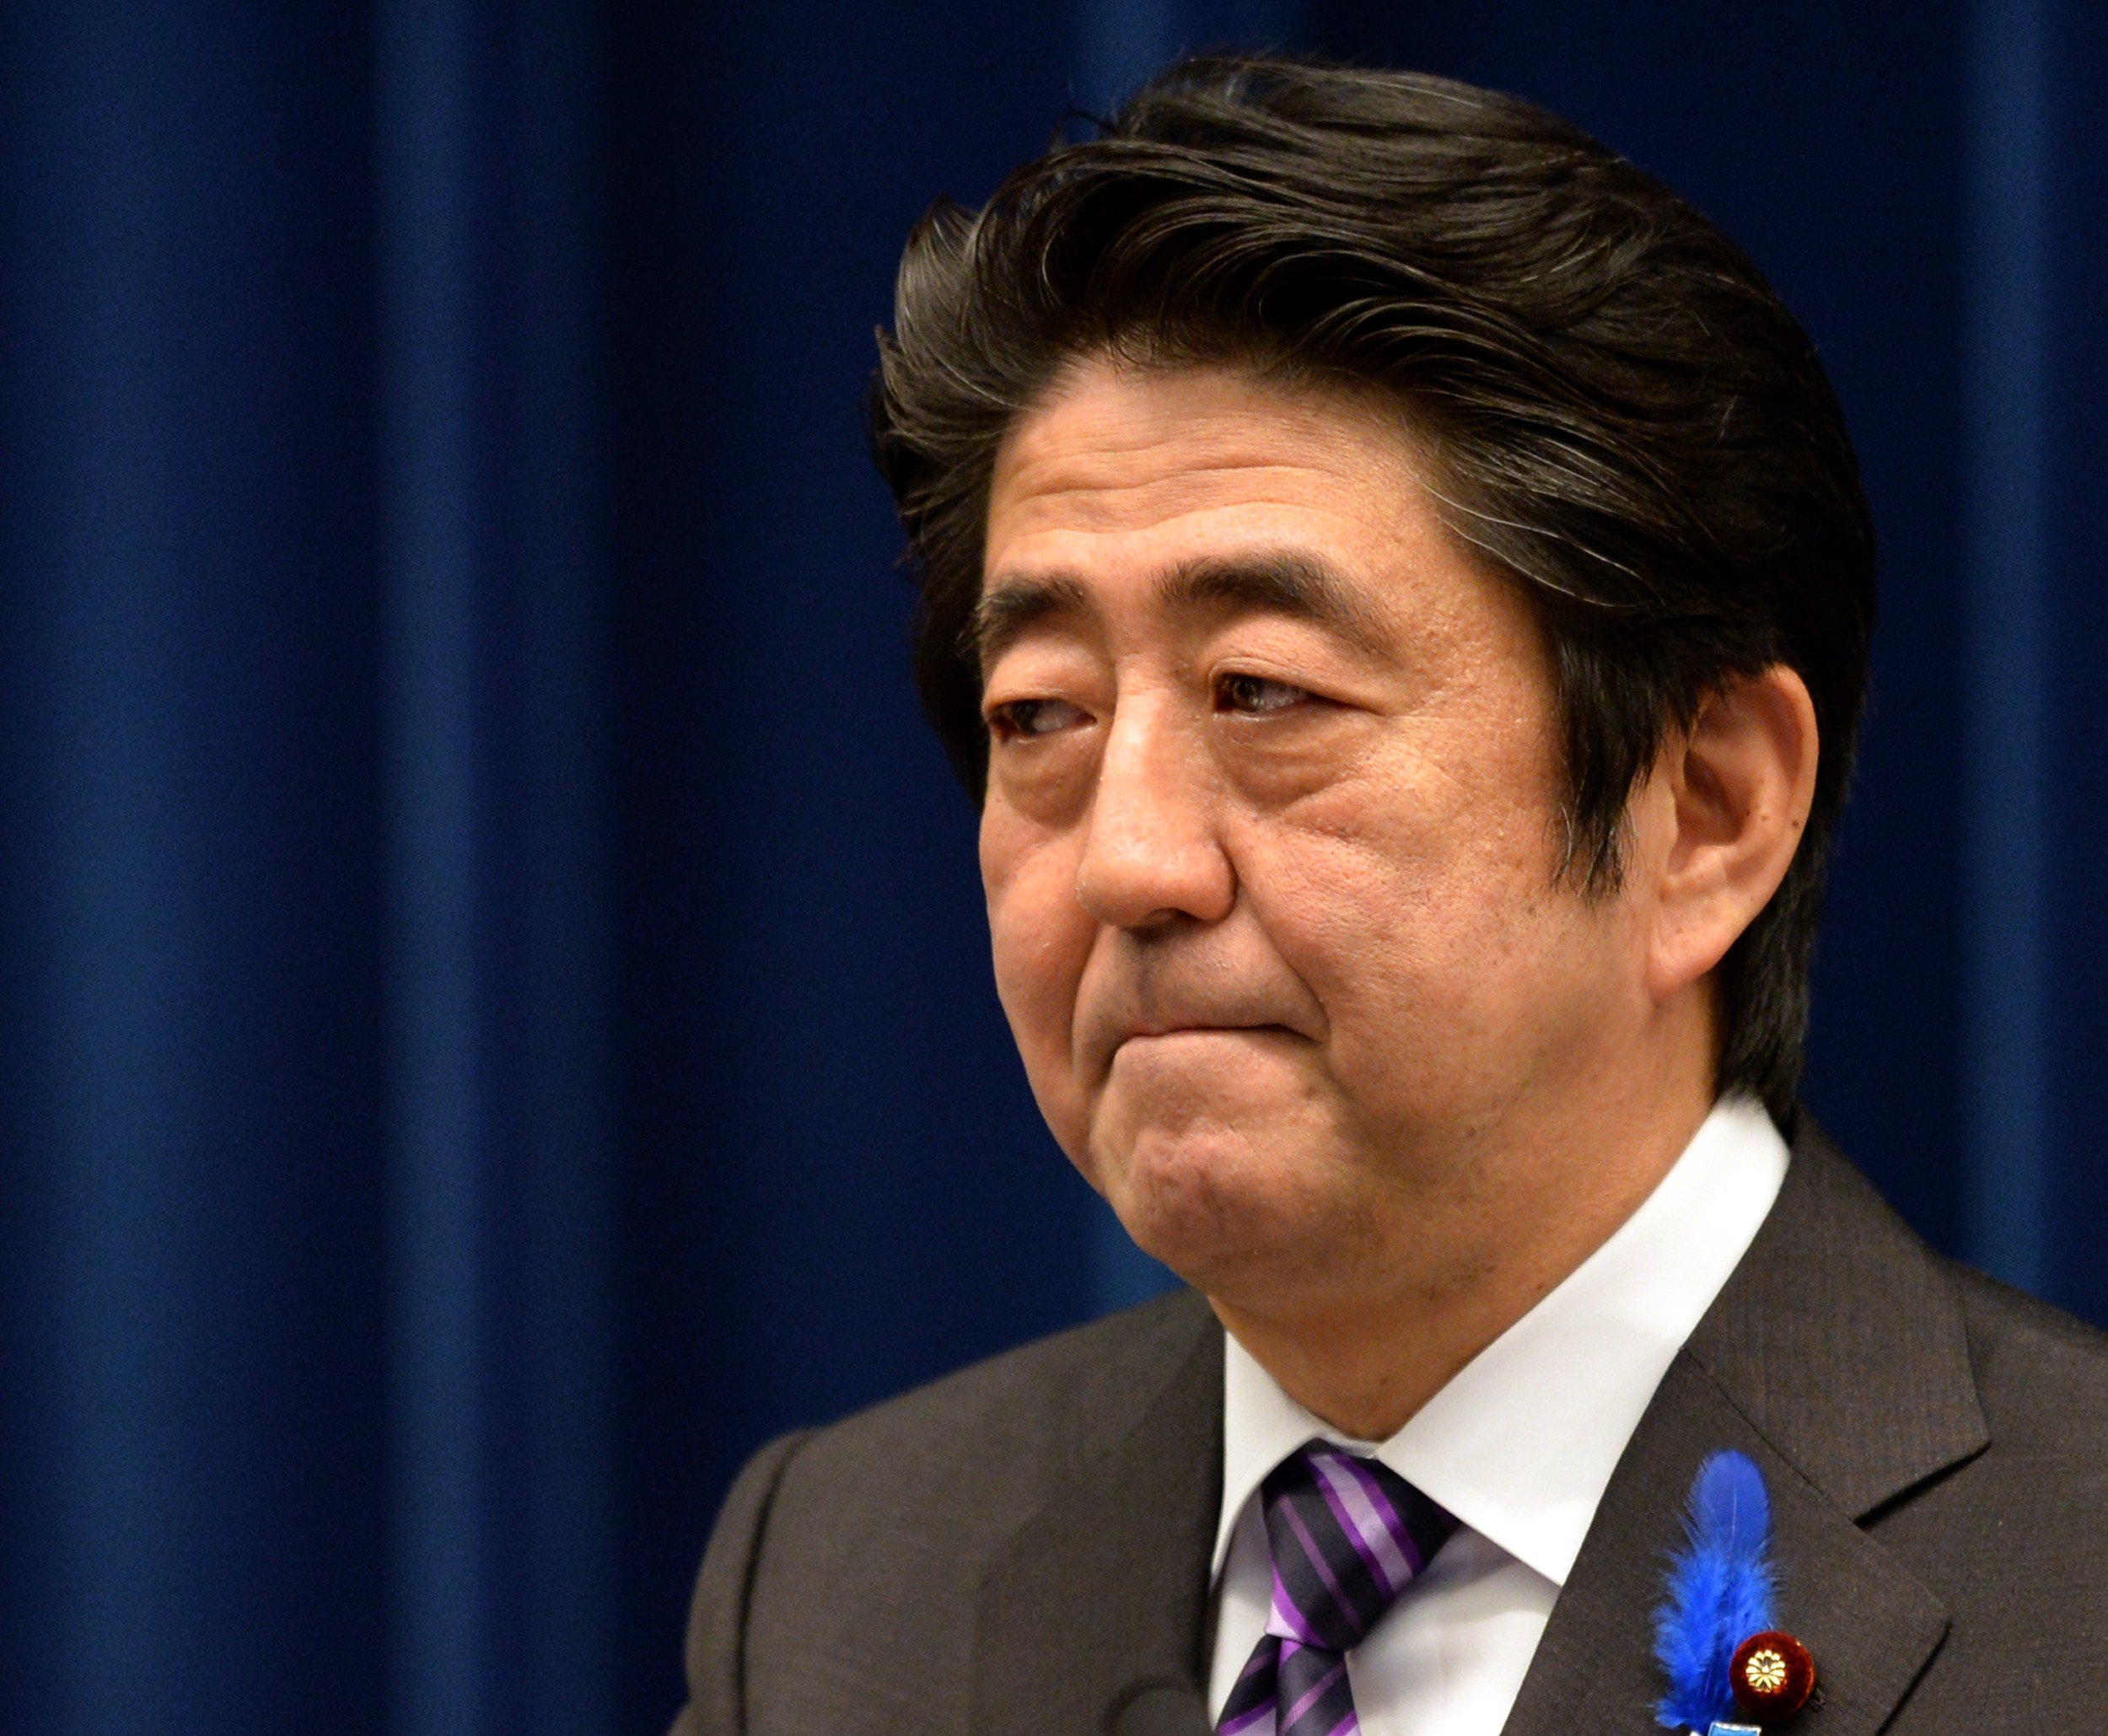 Japanese Prime Minister Shinzo Abe speaks during a press conference at his official residence in Tokyo on July 1, 2014. (Kazuhiro Nogi—AFP/Getty Images)